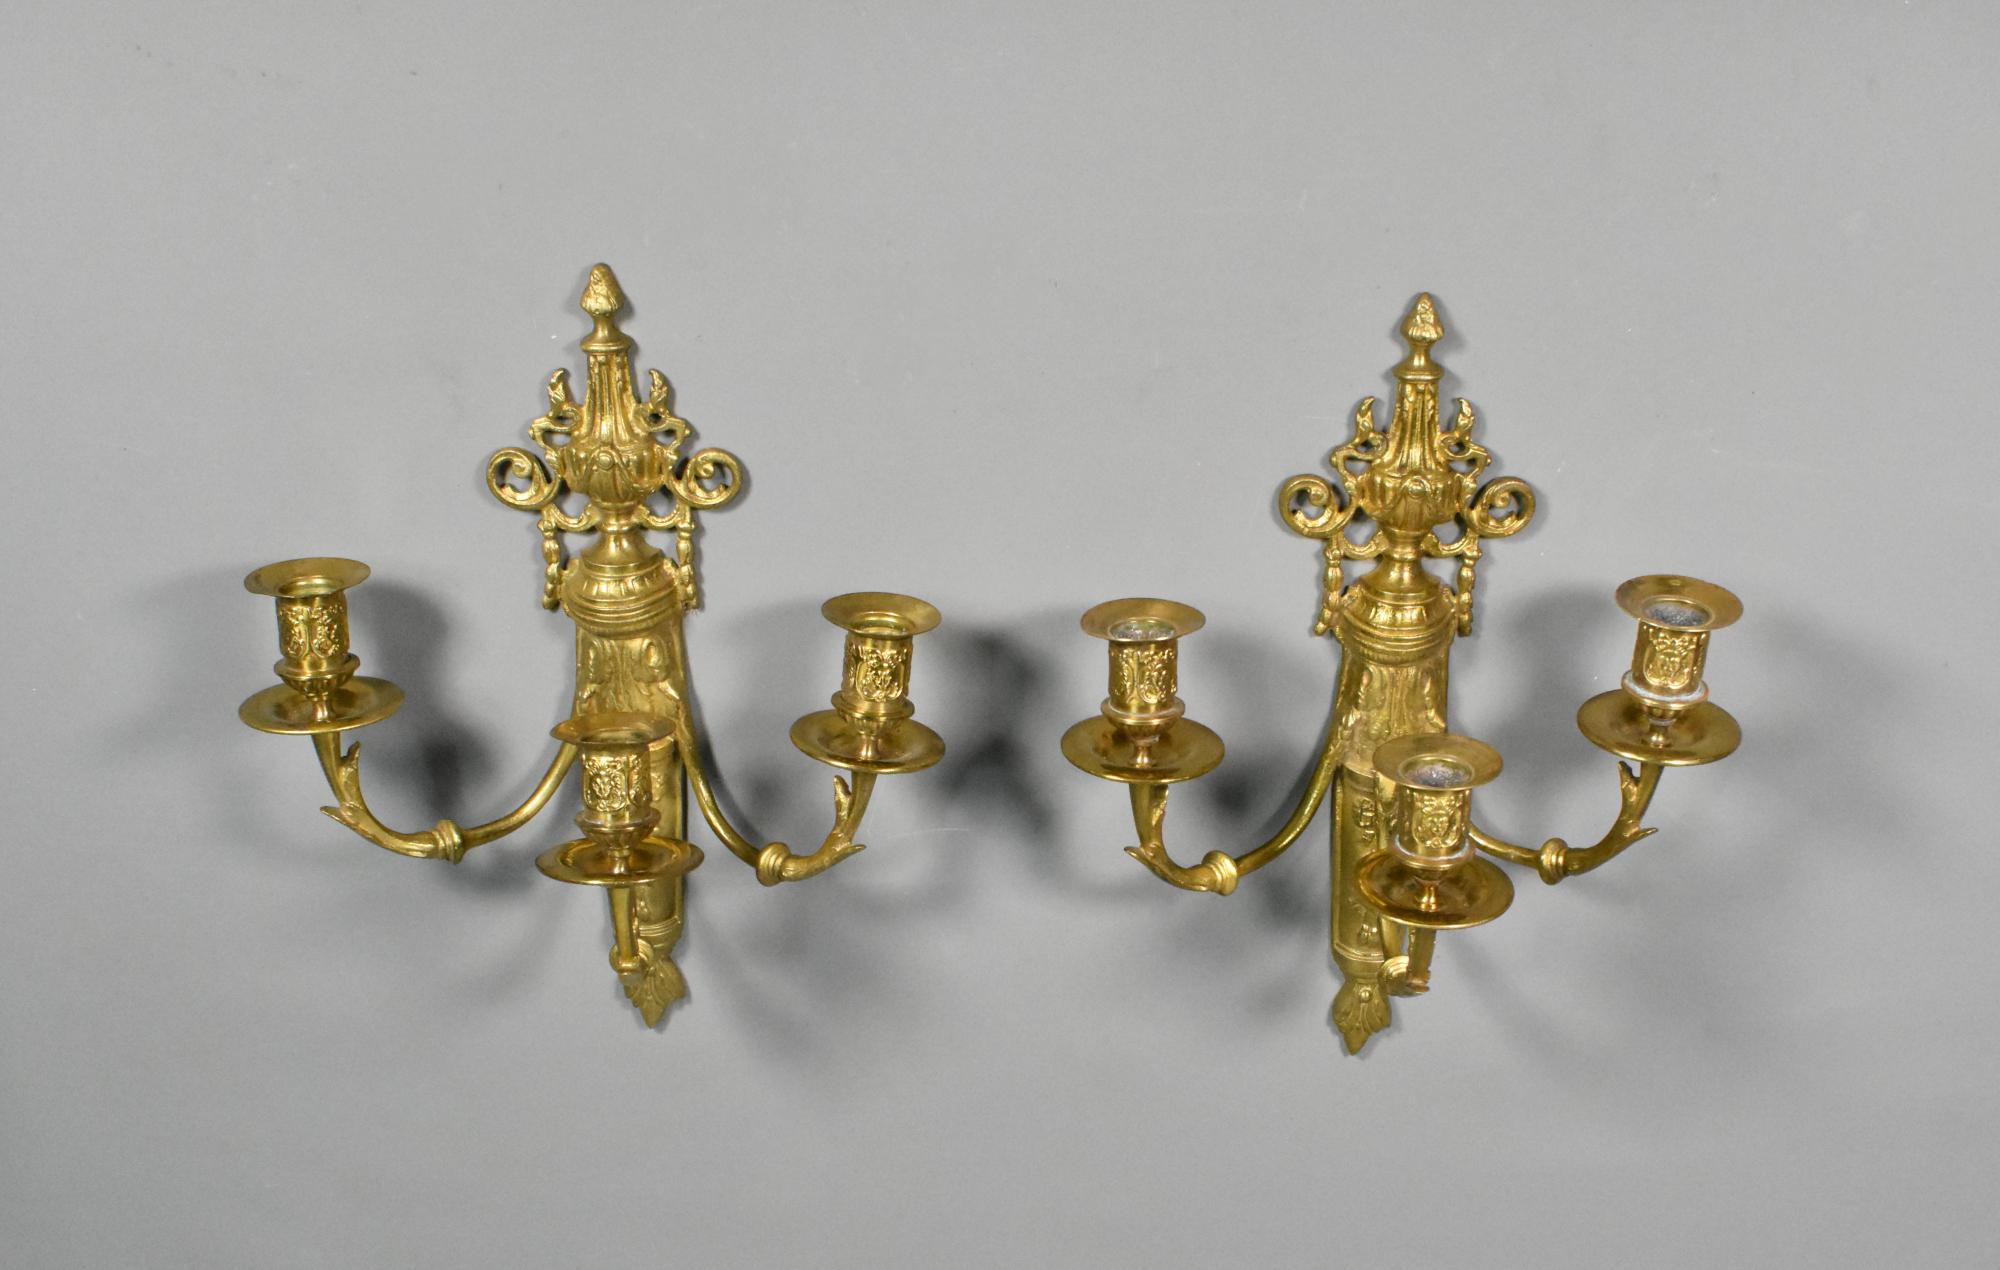 Pair French Gilt Bronze Wall Candelabra Louis XVI Style 

A matching pair of French Gilt Bronze Wall Candelabra featuring elegant swags, ribbons and floral motifs, characteristic of Louis XVI style decoration. 

From the central stem are three